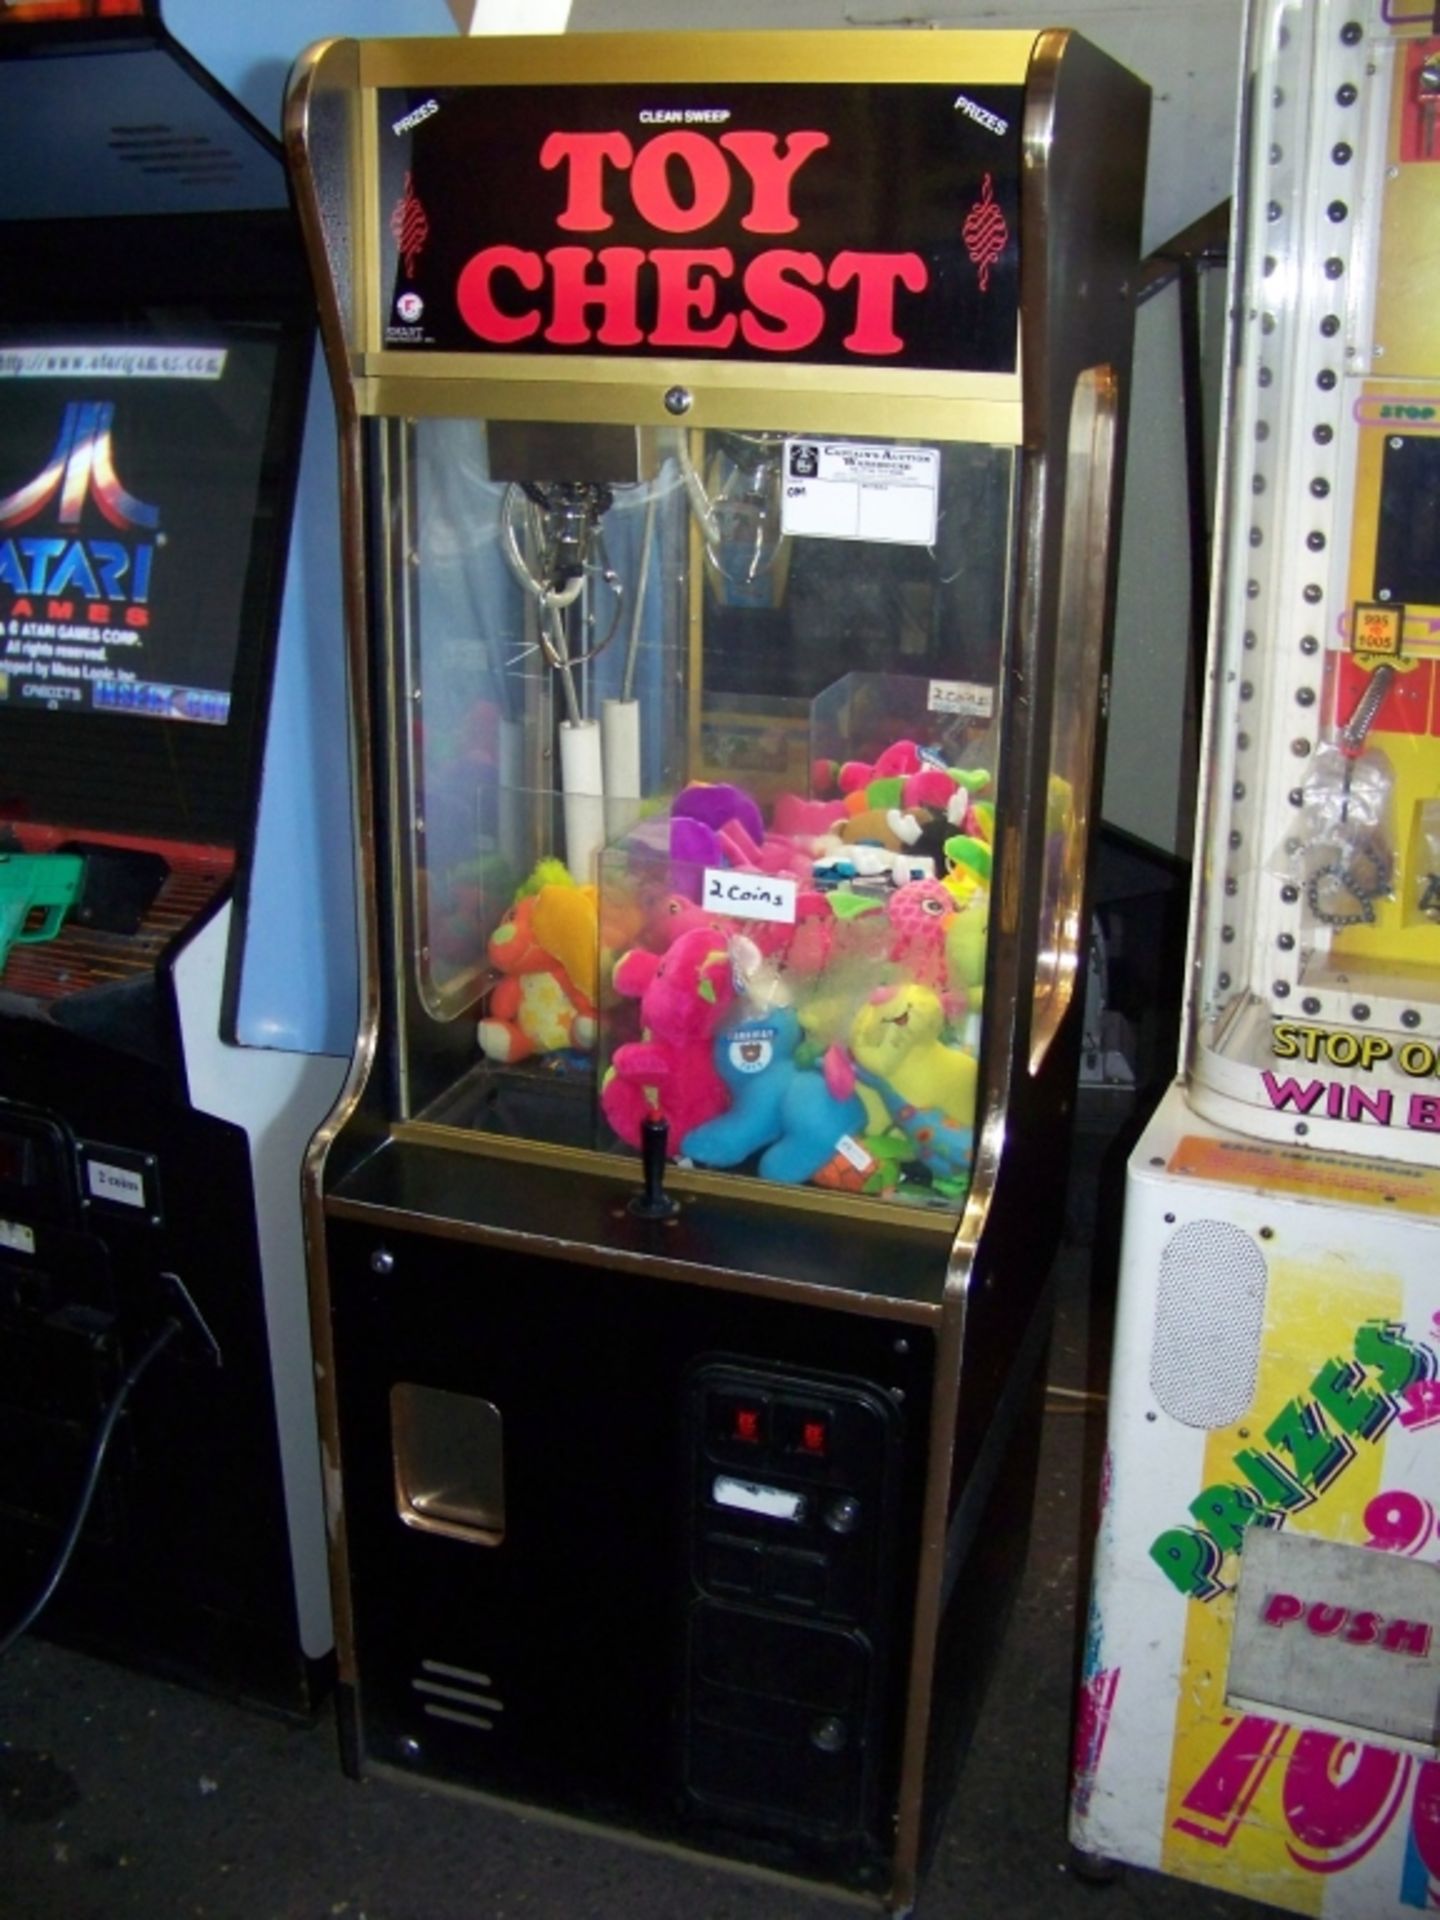 24"" TOY CHEST PLUSH CLAW CRANE MACHINE OM Item is in used condition. Evidence of wear and